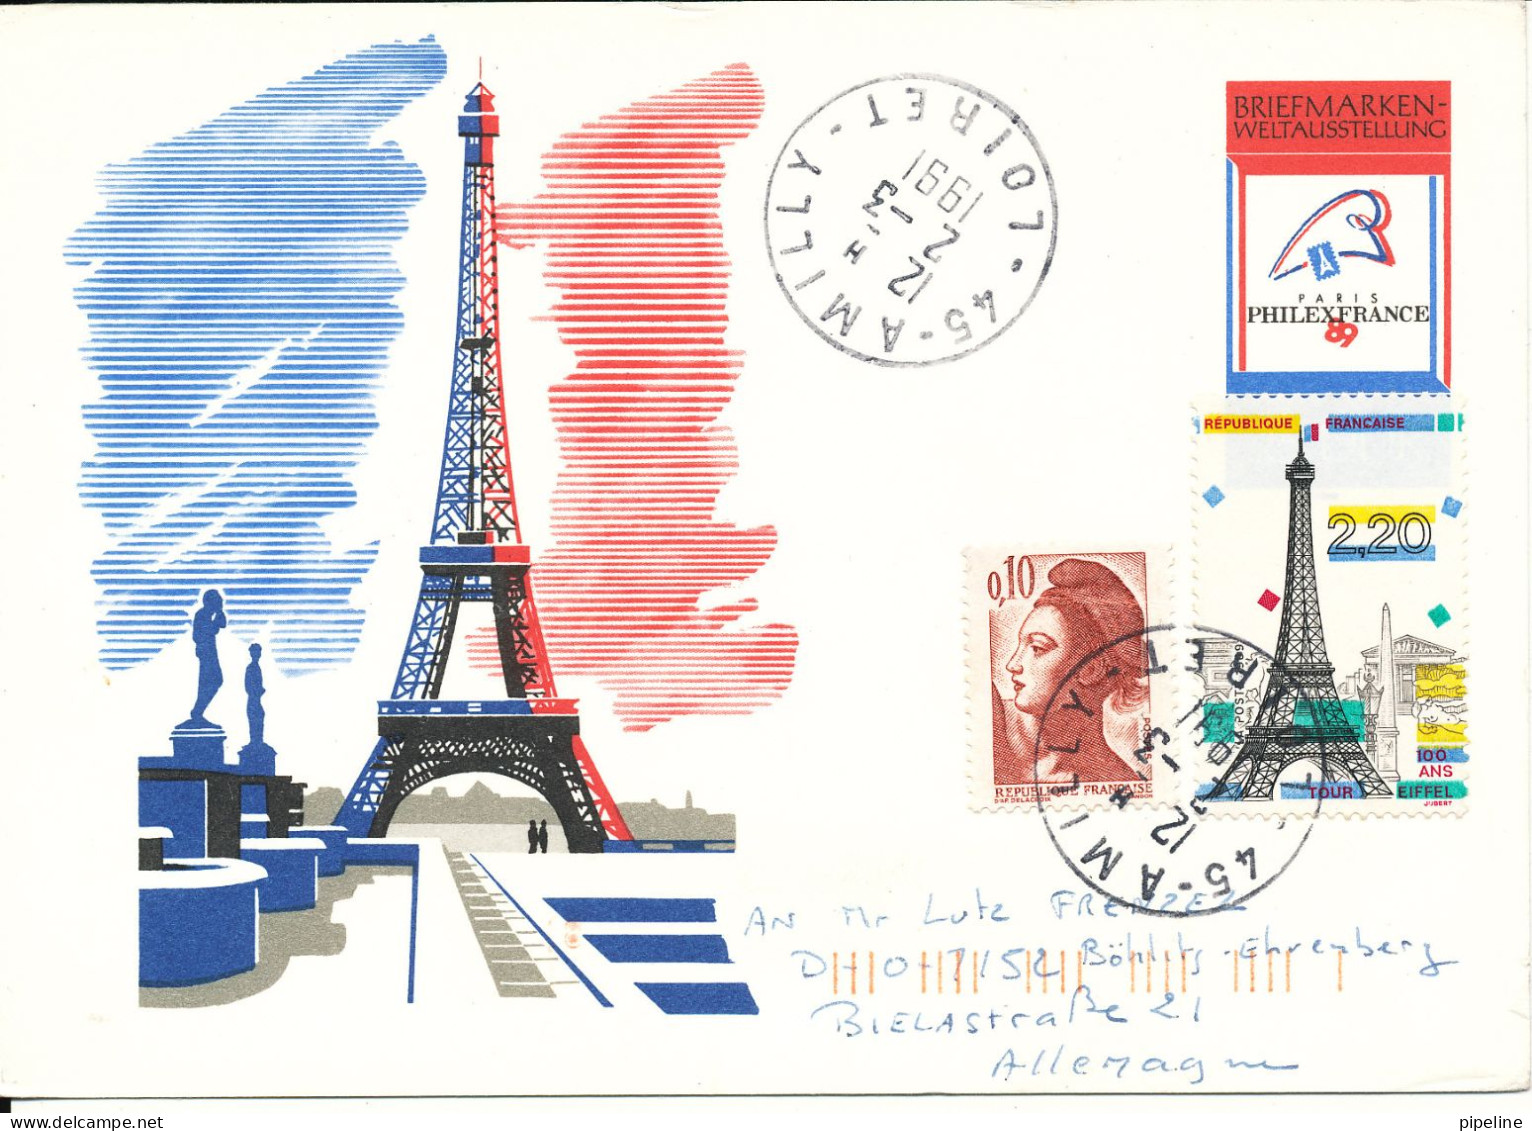 France Uprated Postal Stationery Postcard Philexfrance 89 Eifel Tower Sent To Germany Amilly Loire 2-3-1991 - Cartes-lettres